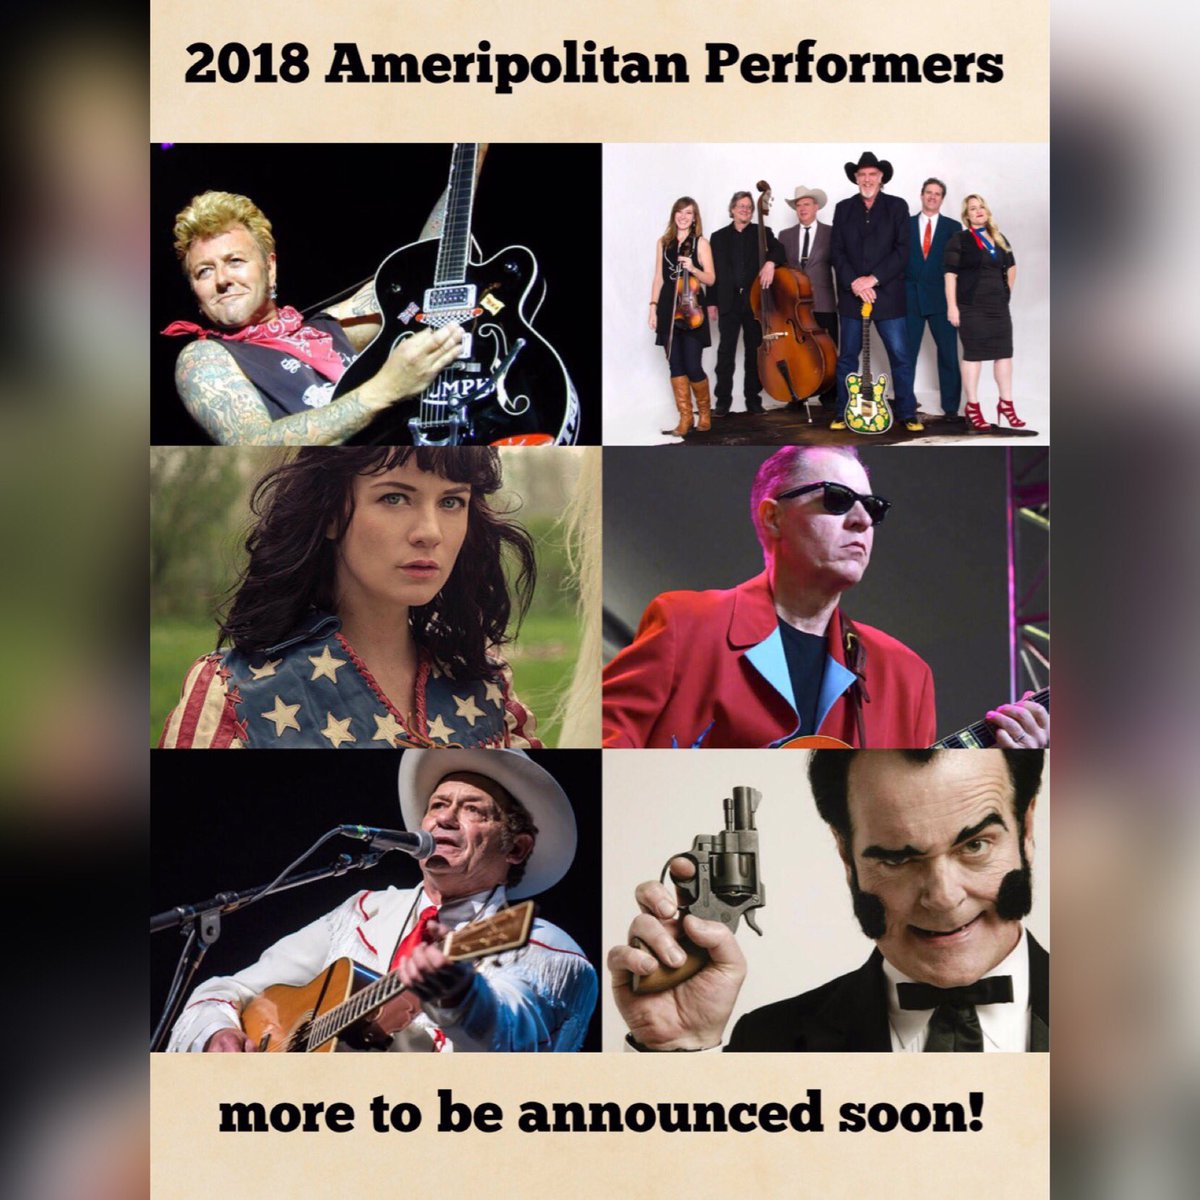 First round of performers at the 2018 Ameripolitan Music Awards announced! Get your tickets NOW! #ameripolitan